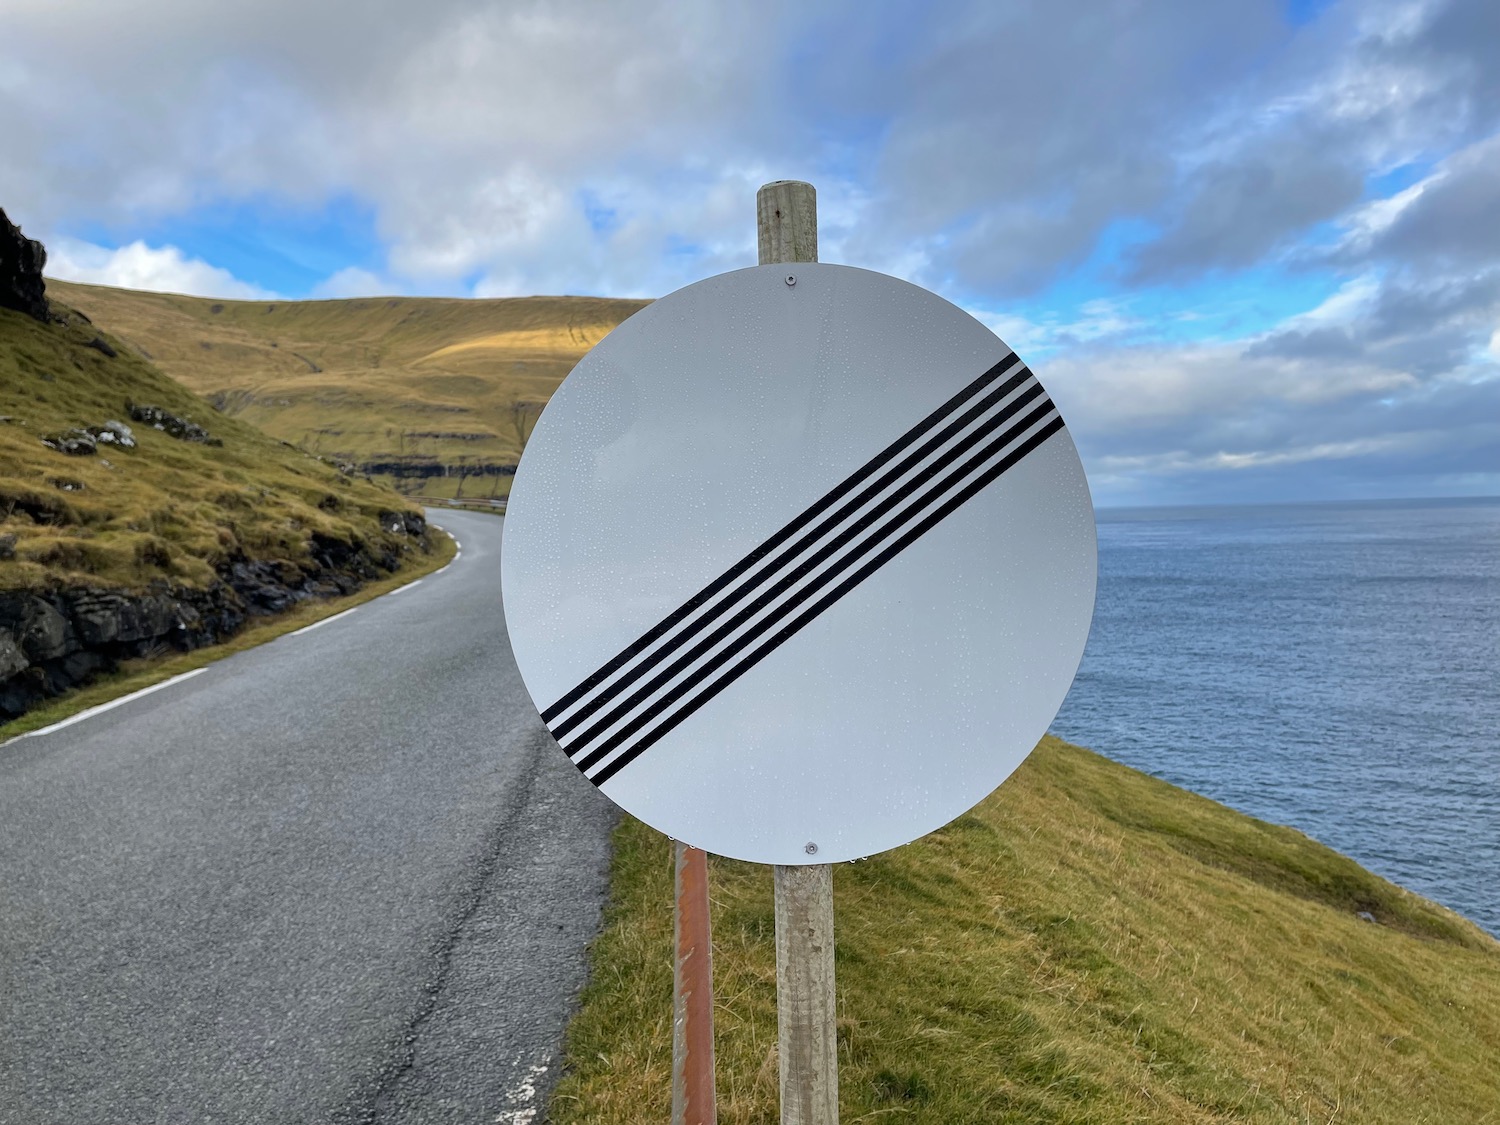 a road sign on a hill by the water